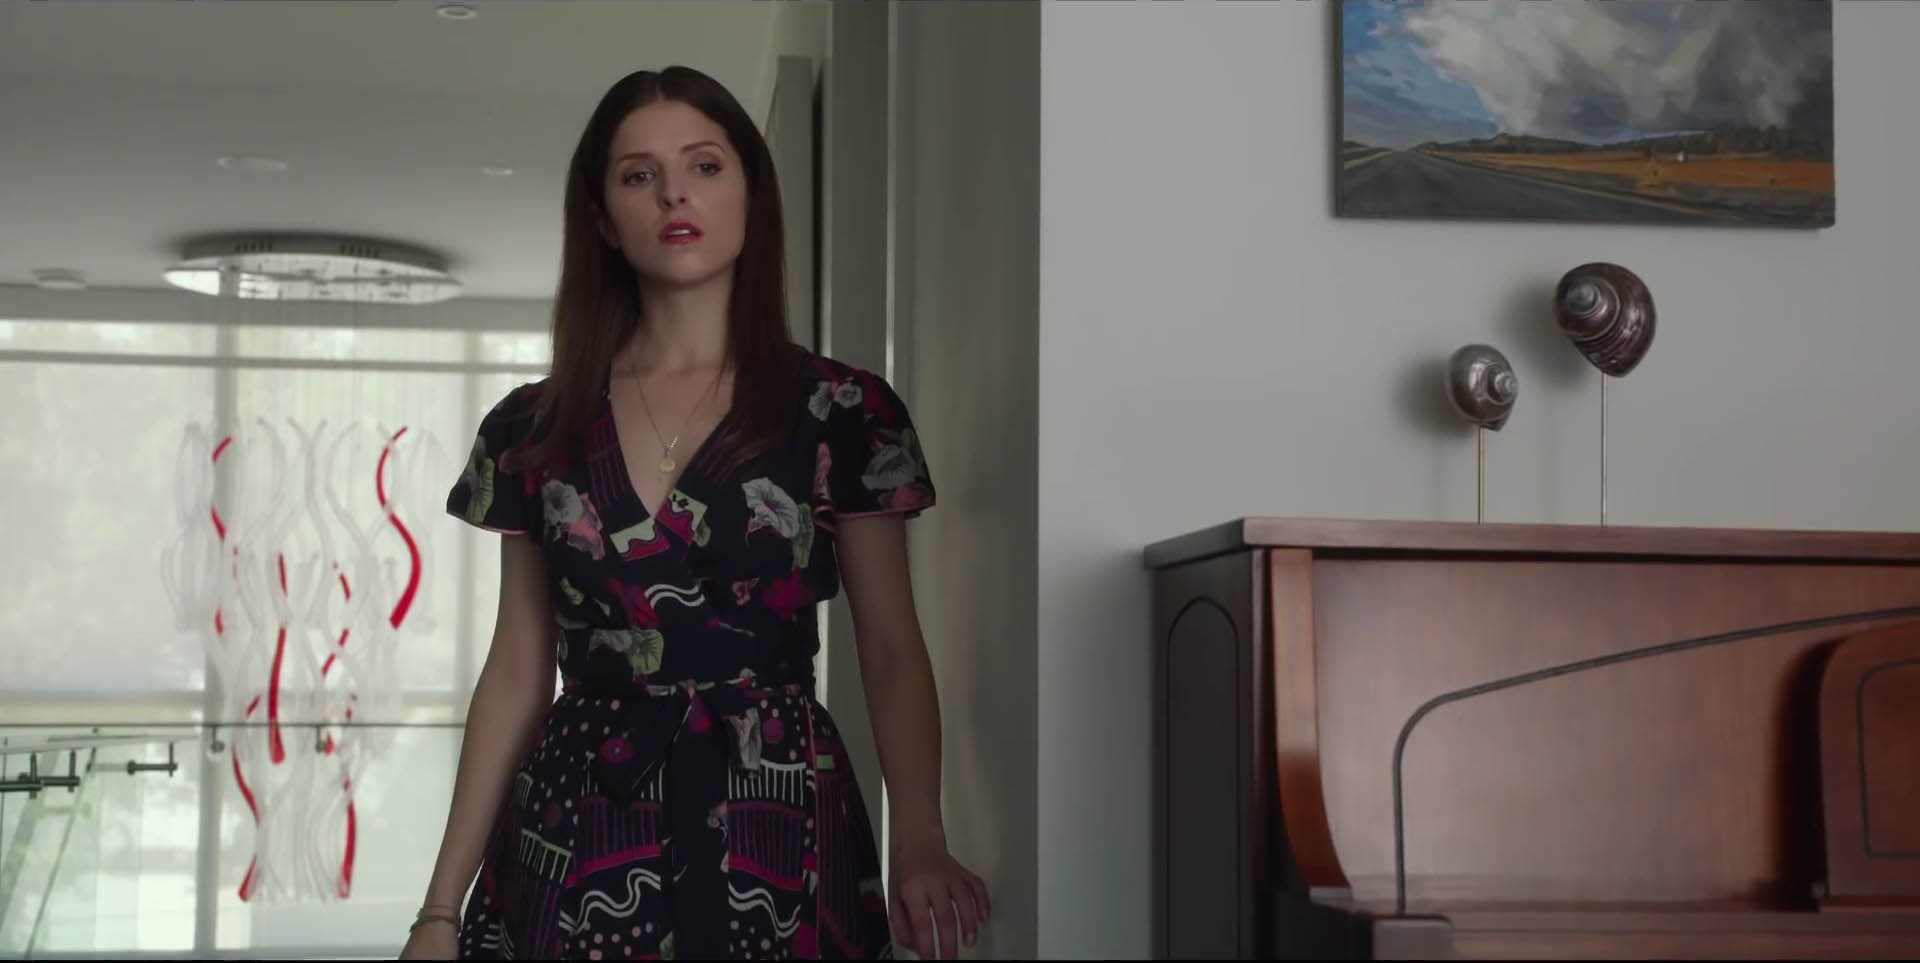 A Simple Favor Trailer - What Happened to Emily? | The Nerdy1920 x 963